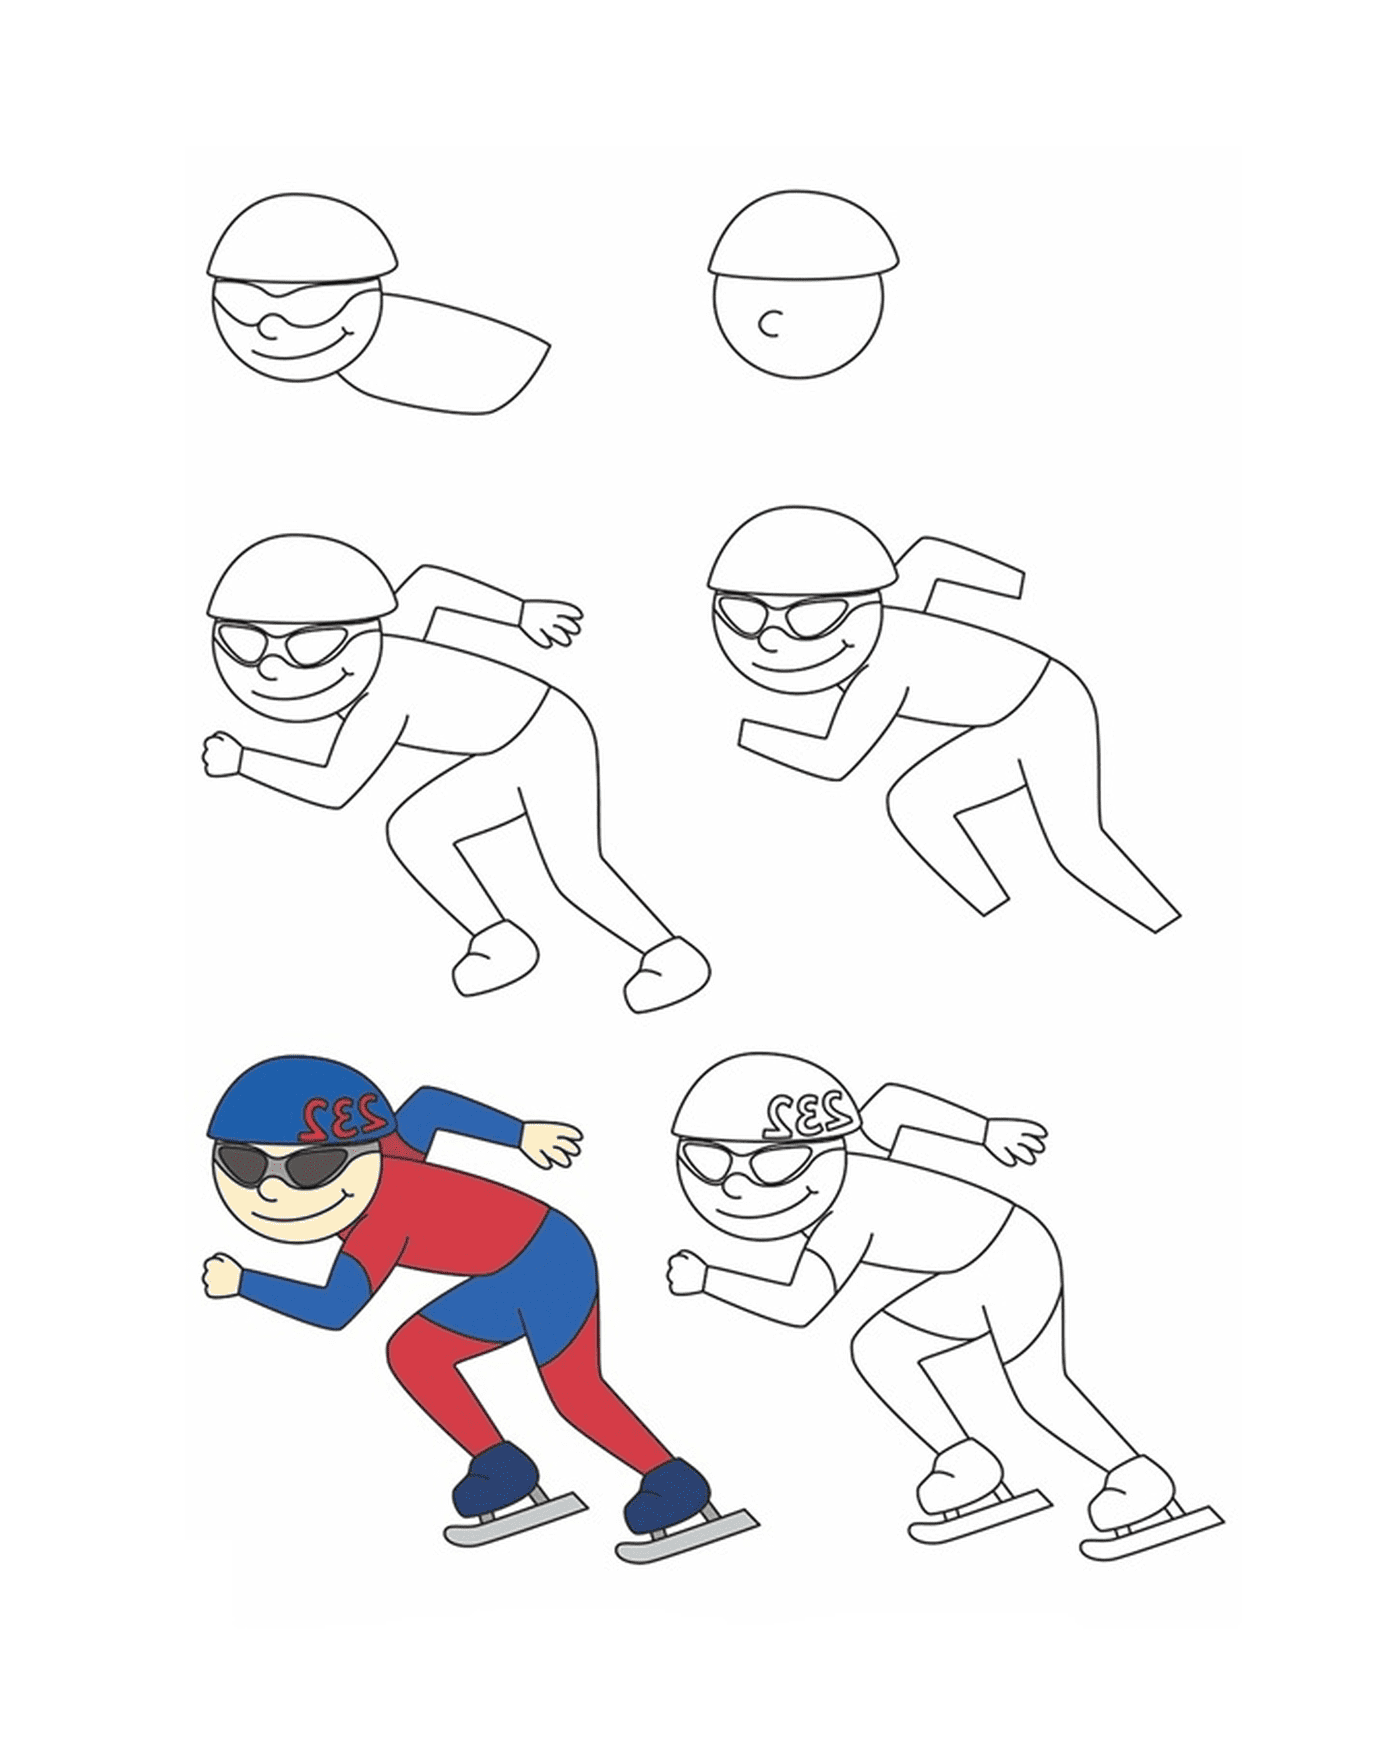  How to draw speed skating 